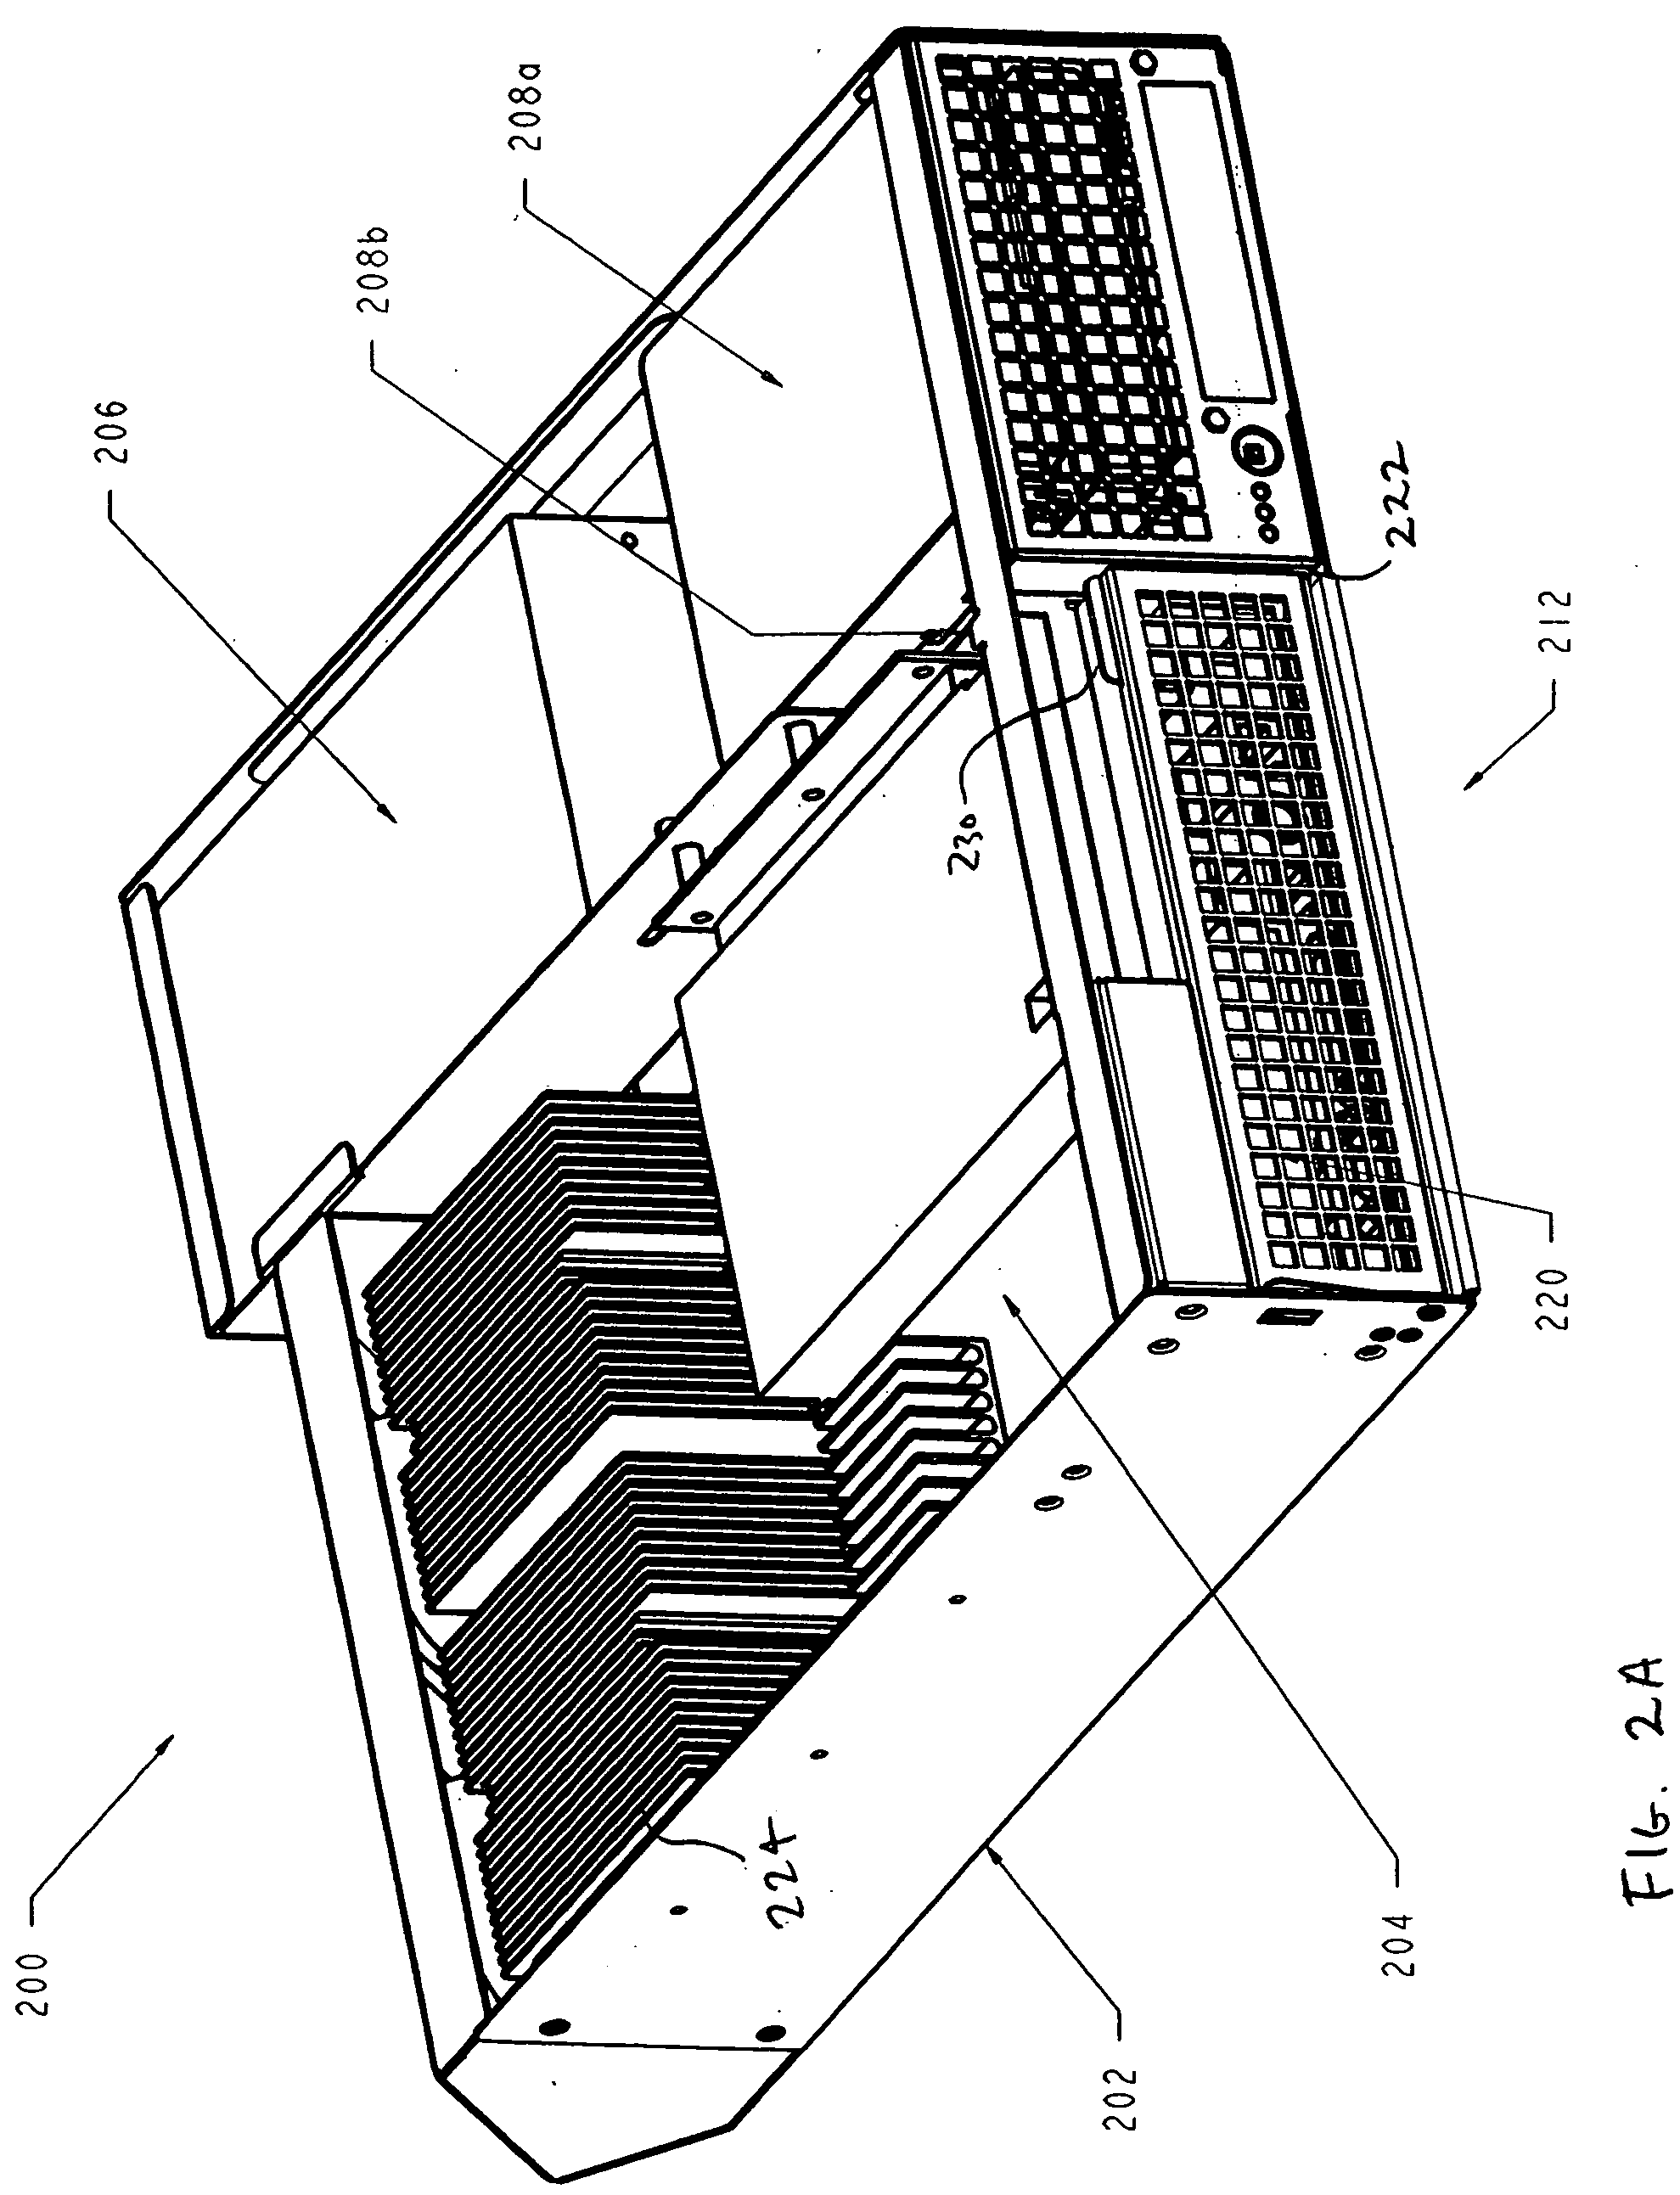 Electromagnetic interference shield for I/O ports